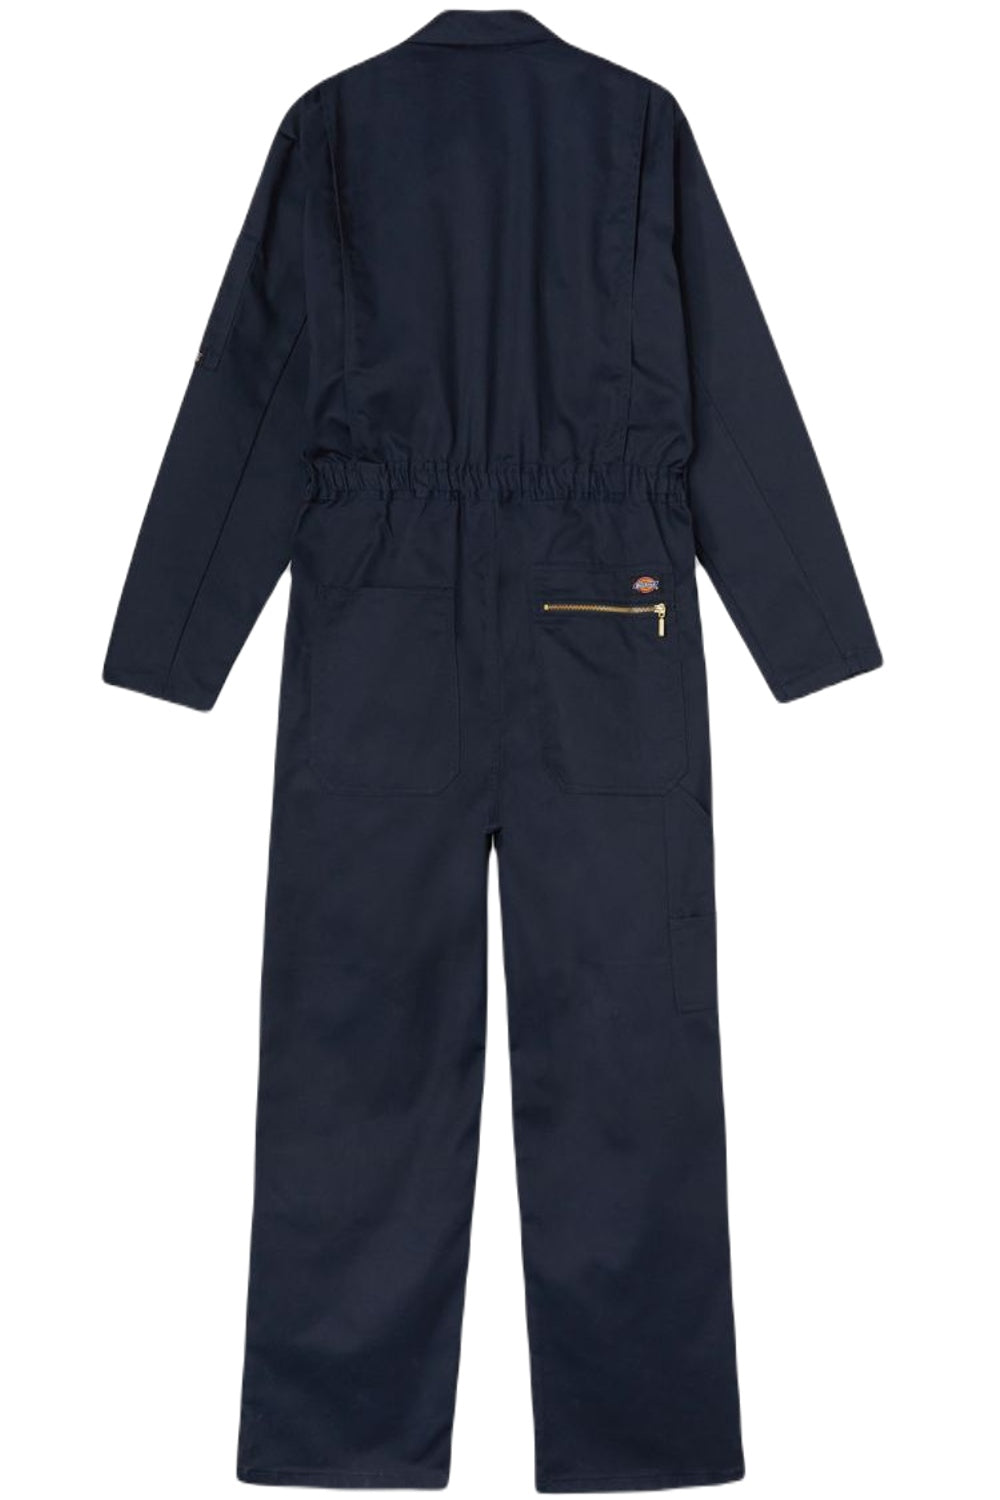 Dickies Redhawk Coverall in Navy Blue 